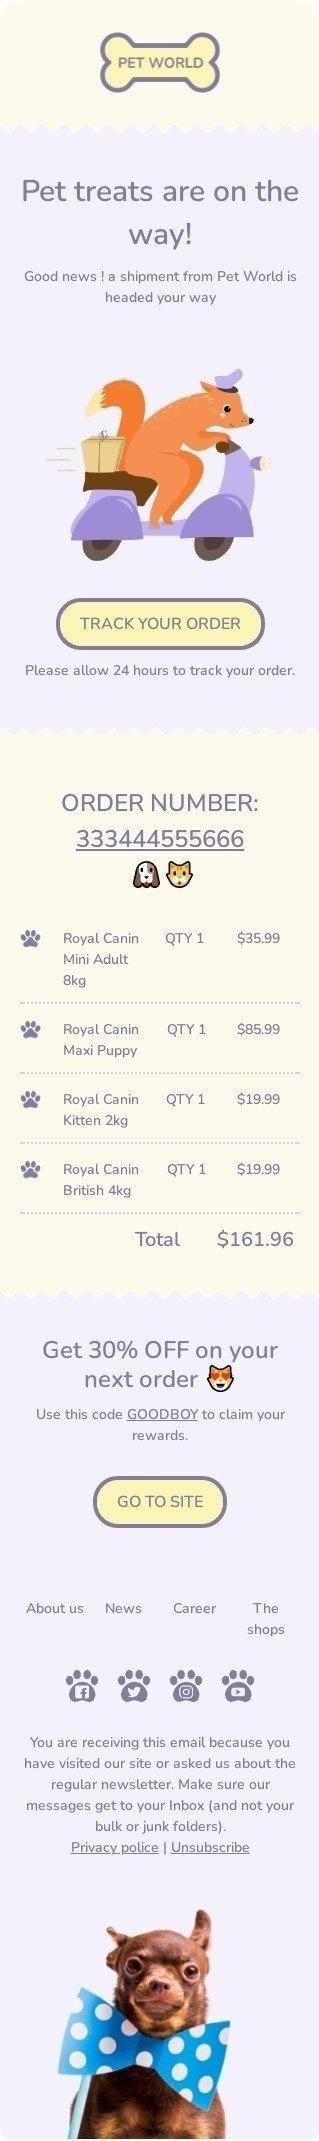 Delivery Email Template "Pet treats are on the way" for Pets industry mobile view